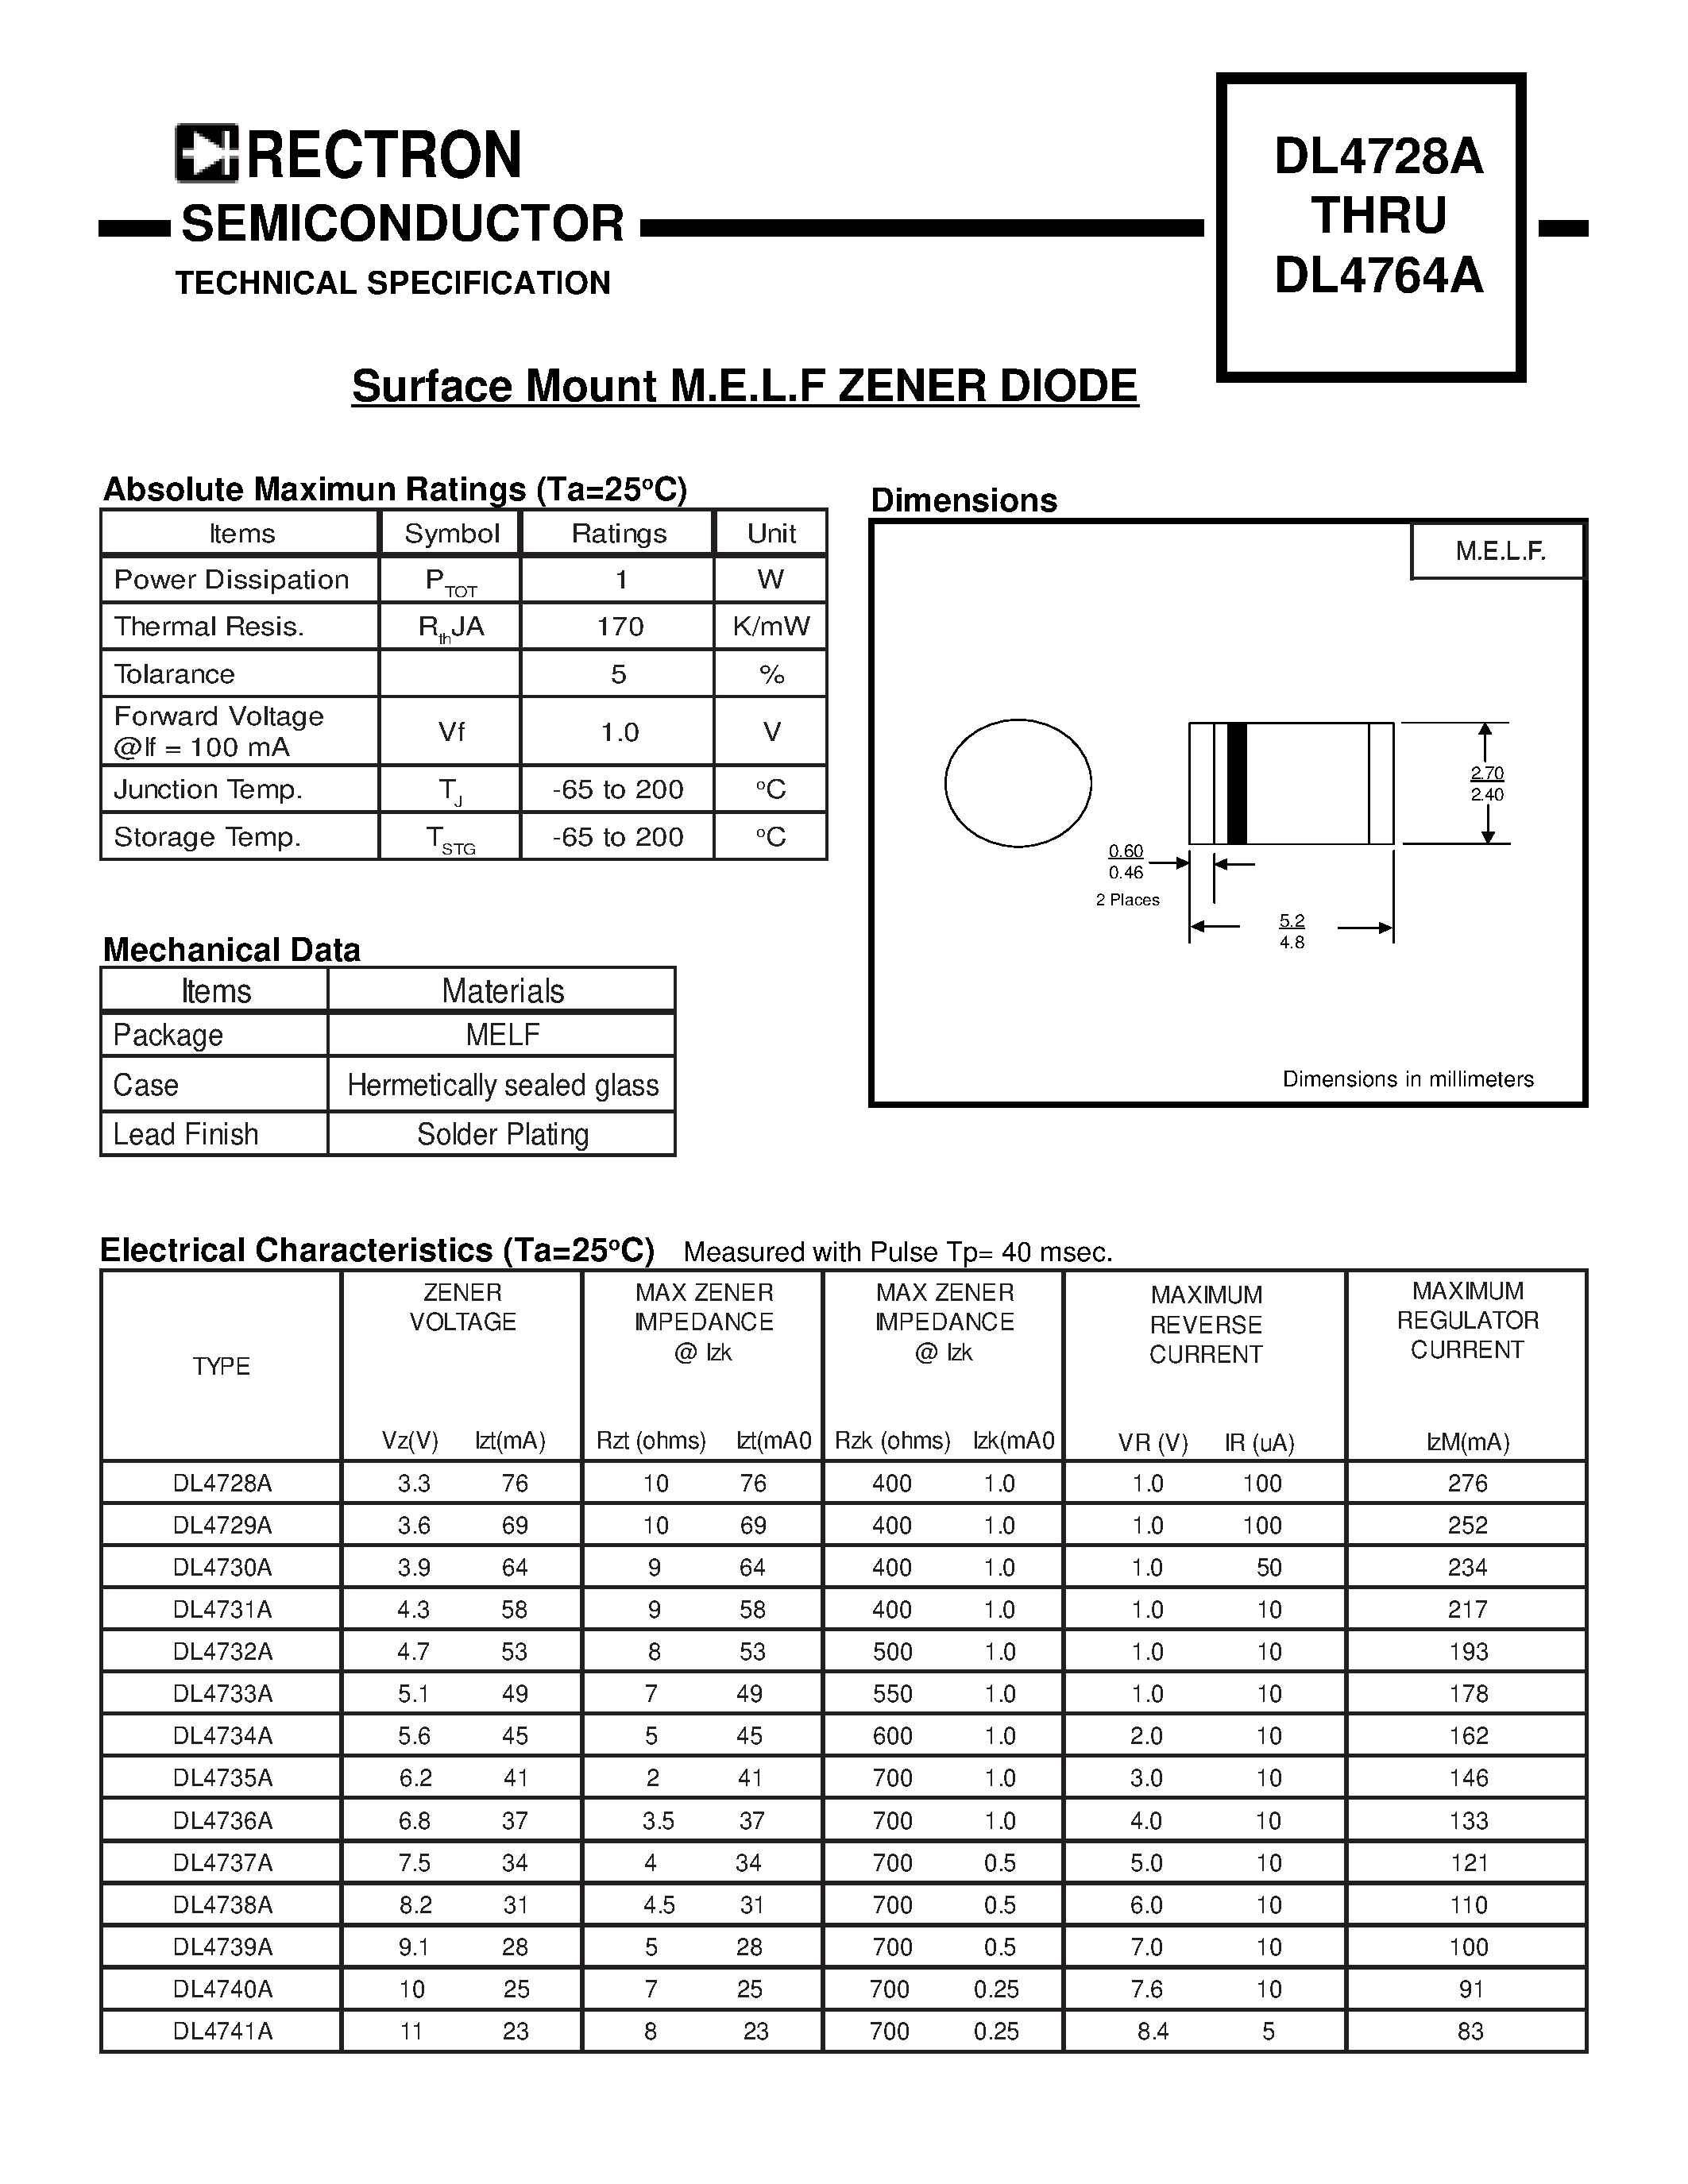 Datasheet DL4750A - Surface Mount M.E.L.F ZENER DIODE page 1